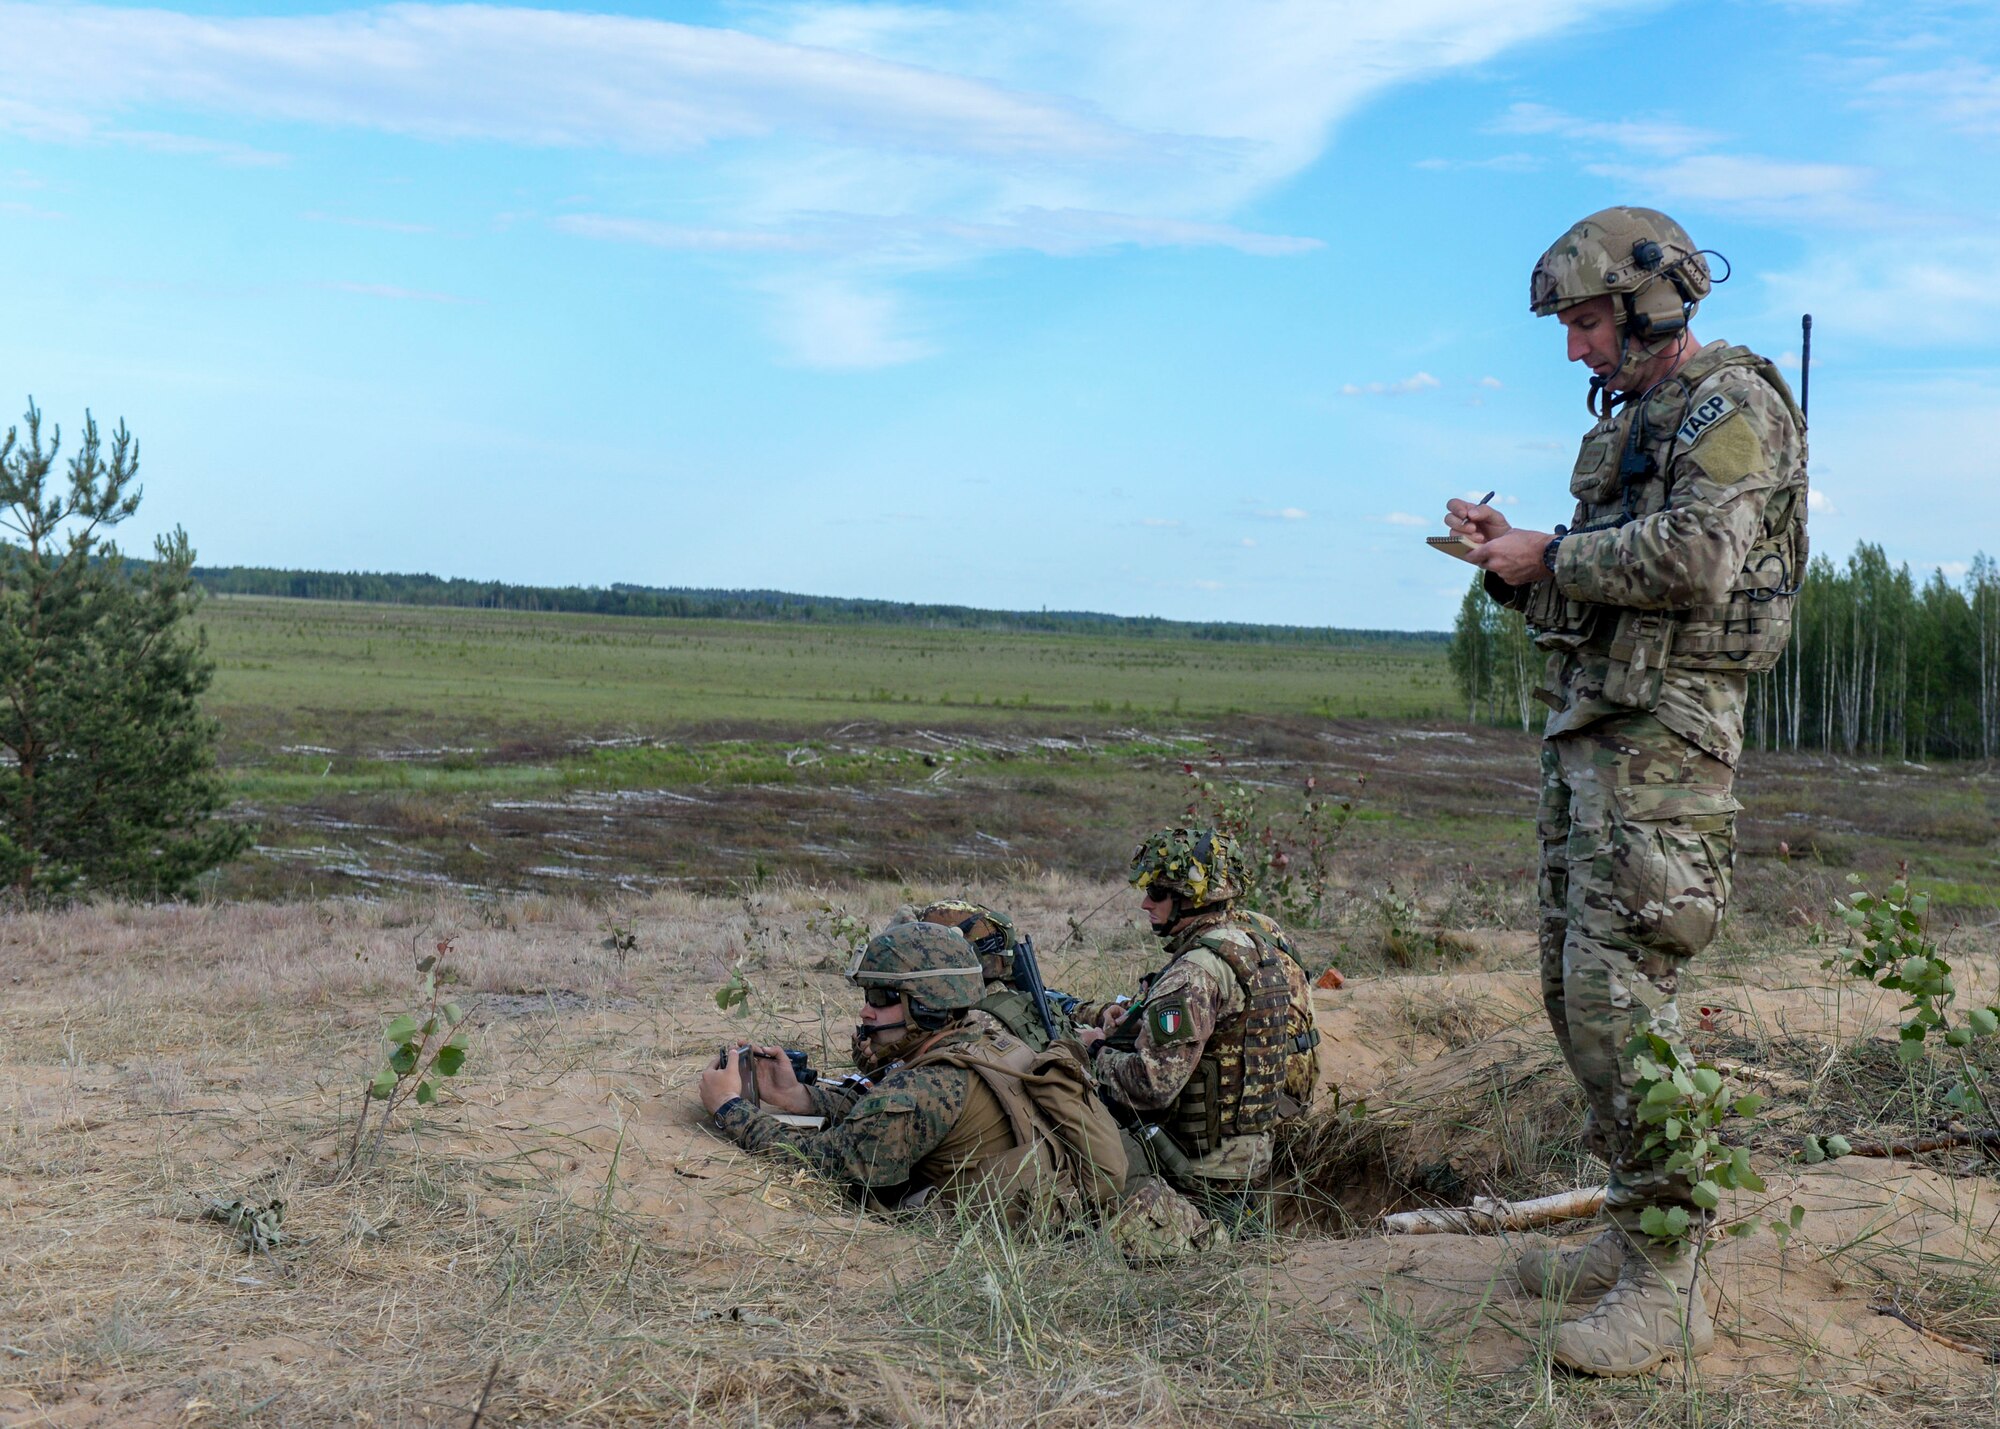 U.S. Air Force Senior Master Sgt. Perry Jackson, right, 122nd Air Support Operations Squadron superintendent, takes notes as an observer controller in Adazi, Latvia on June 7, 2018. Observer controllers help control scenarios for other controllers to work through during exercises and assist the Range Control Officer with safety. (U.S. Air Force photo by Staff Sgt. Jimmie D. Pike)